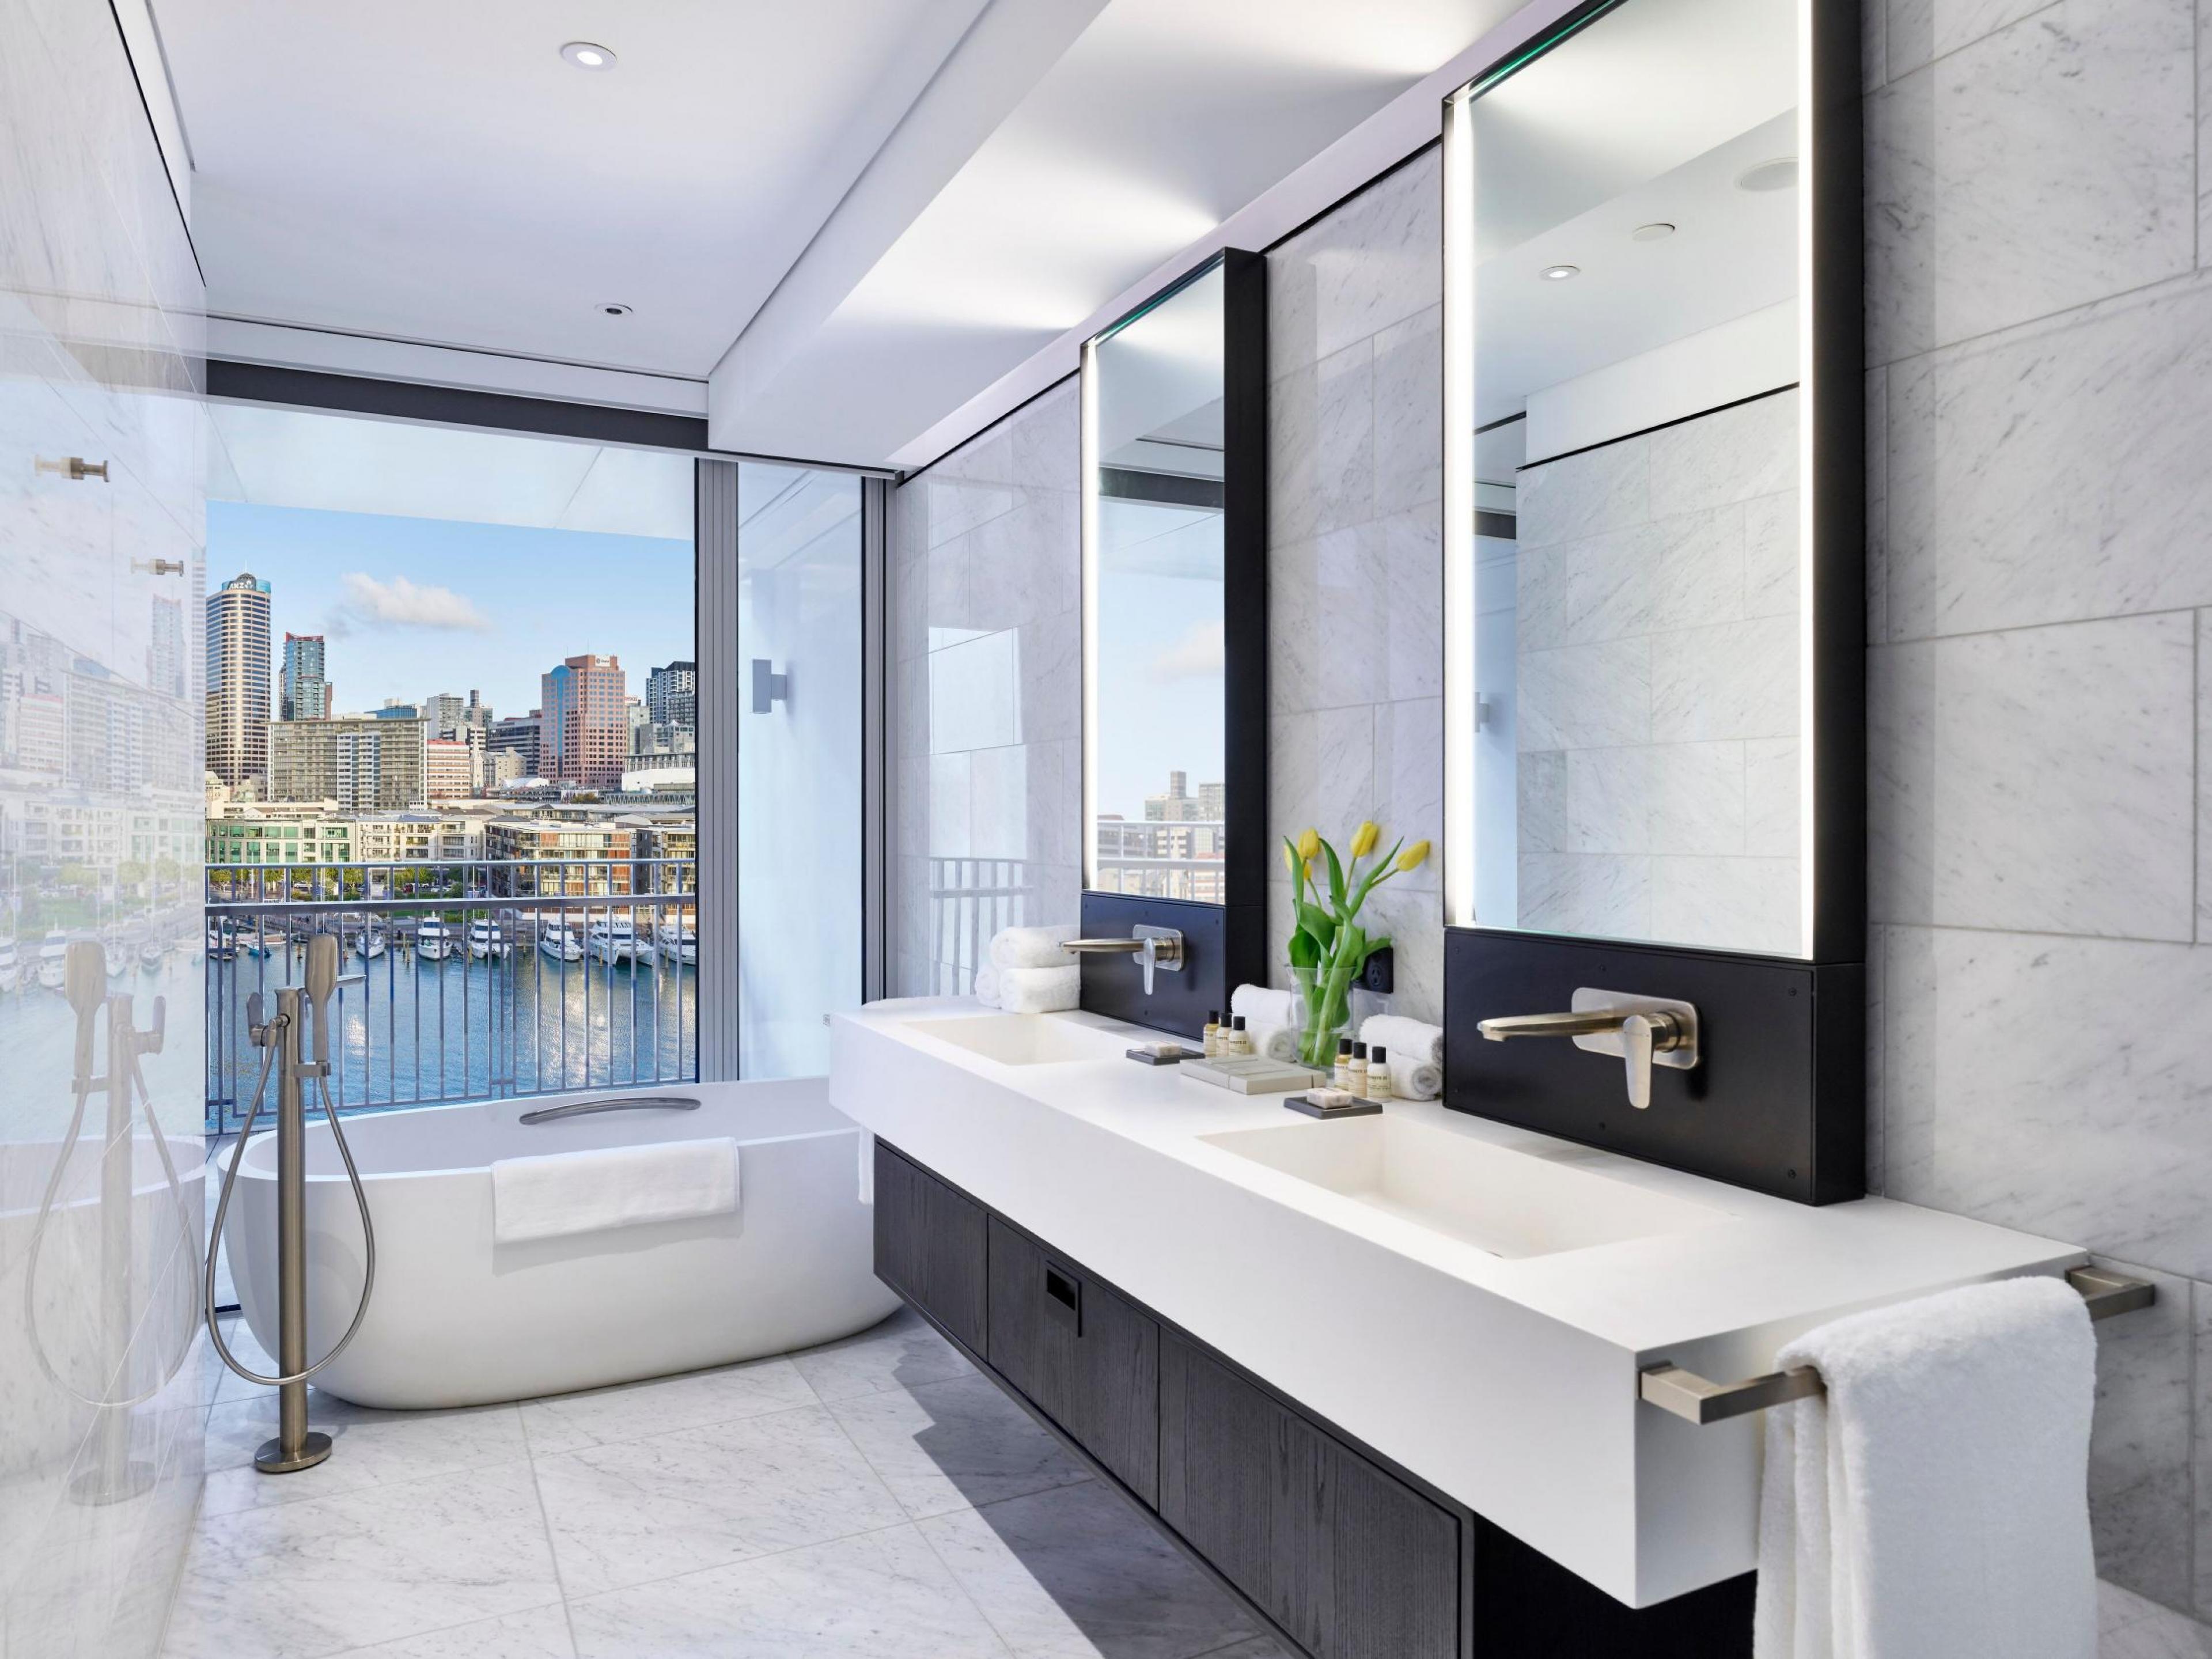 A bathroom with gray and white tiled flooring and wall with a white sink and two mirrors along the wall and a large soaking tub in the back in front of a window overlooking Auckland 